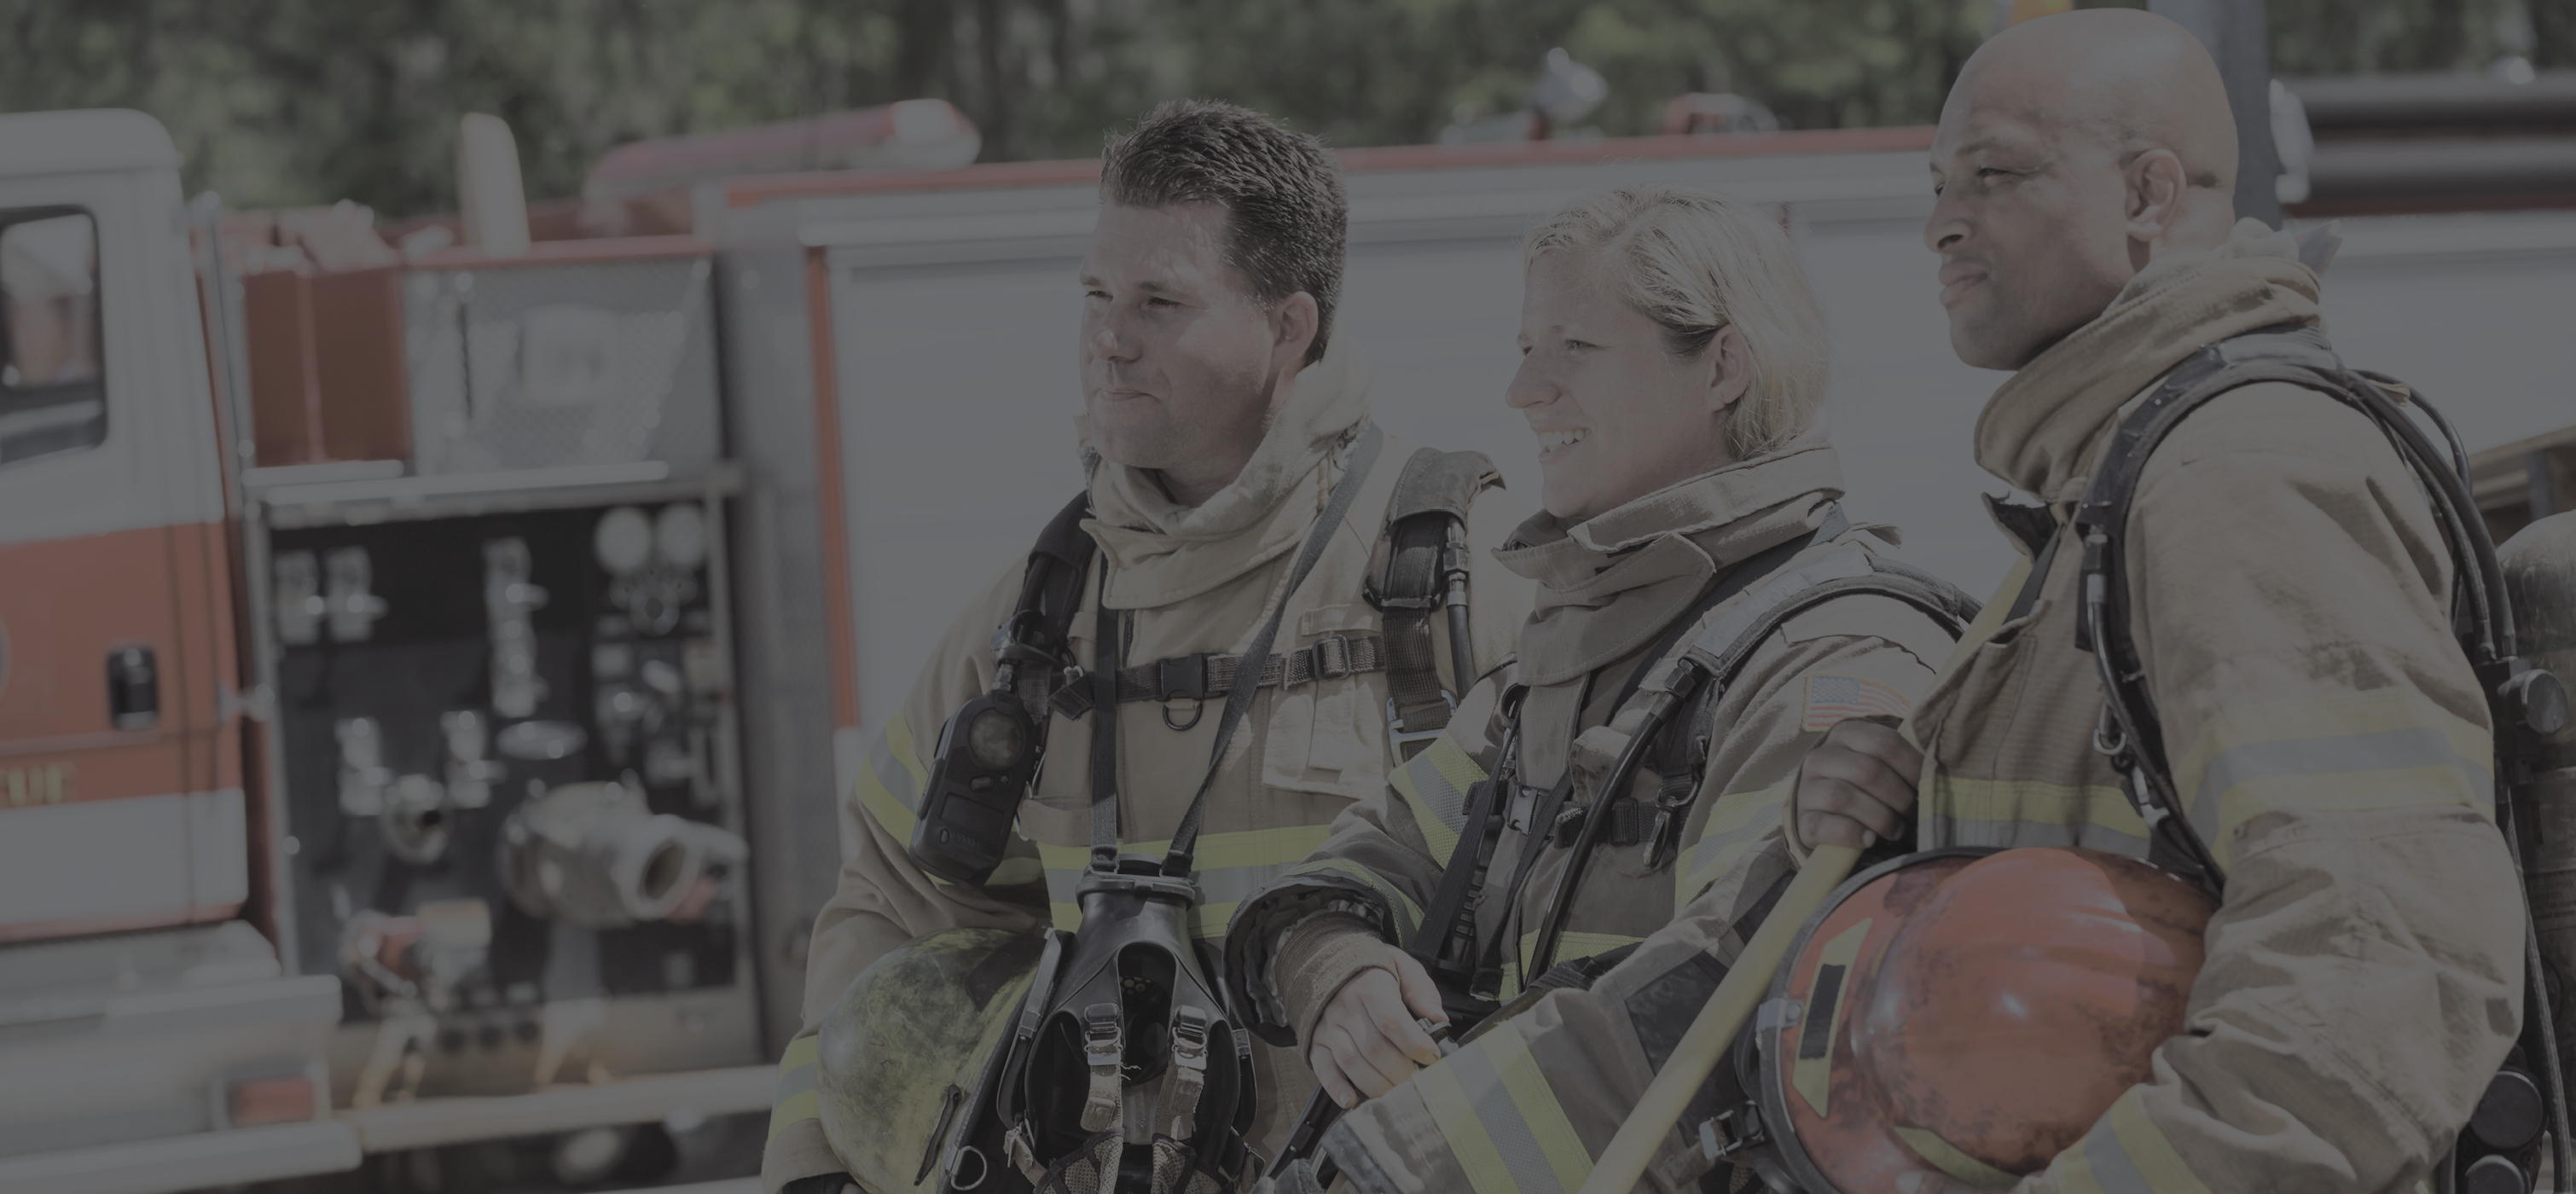 3 people dressed in firefighting gear standing next to a fire truck